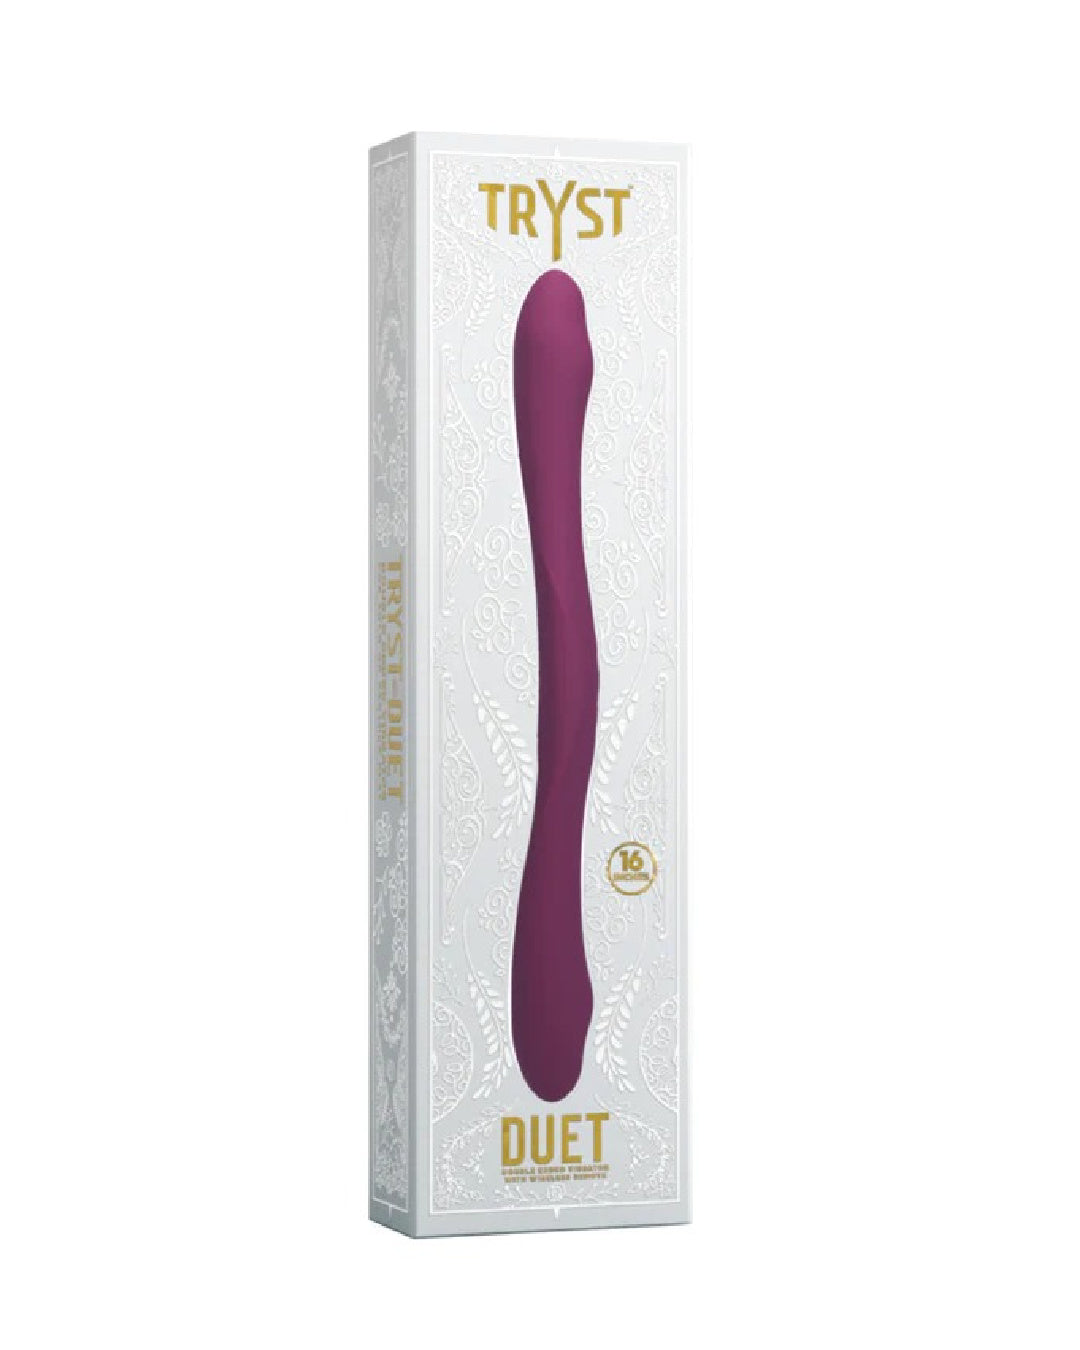 Tryst Duet Double Ended Vibrator with Remote - Packaging, white box gold lettering at the top says TRYST and product image displayed below